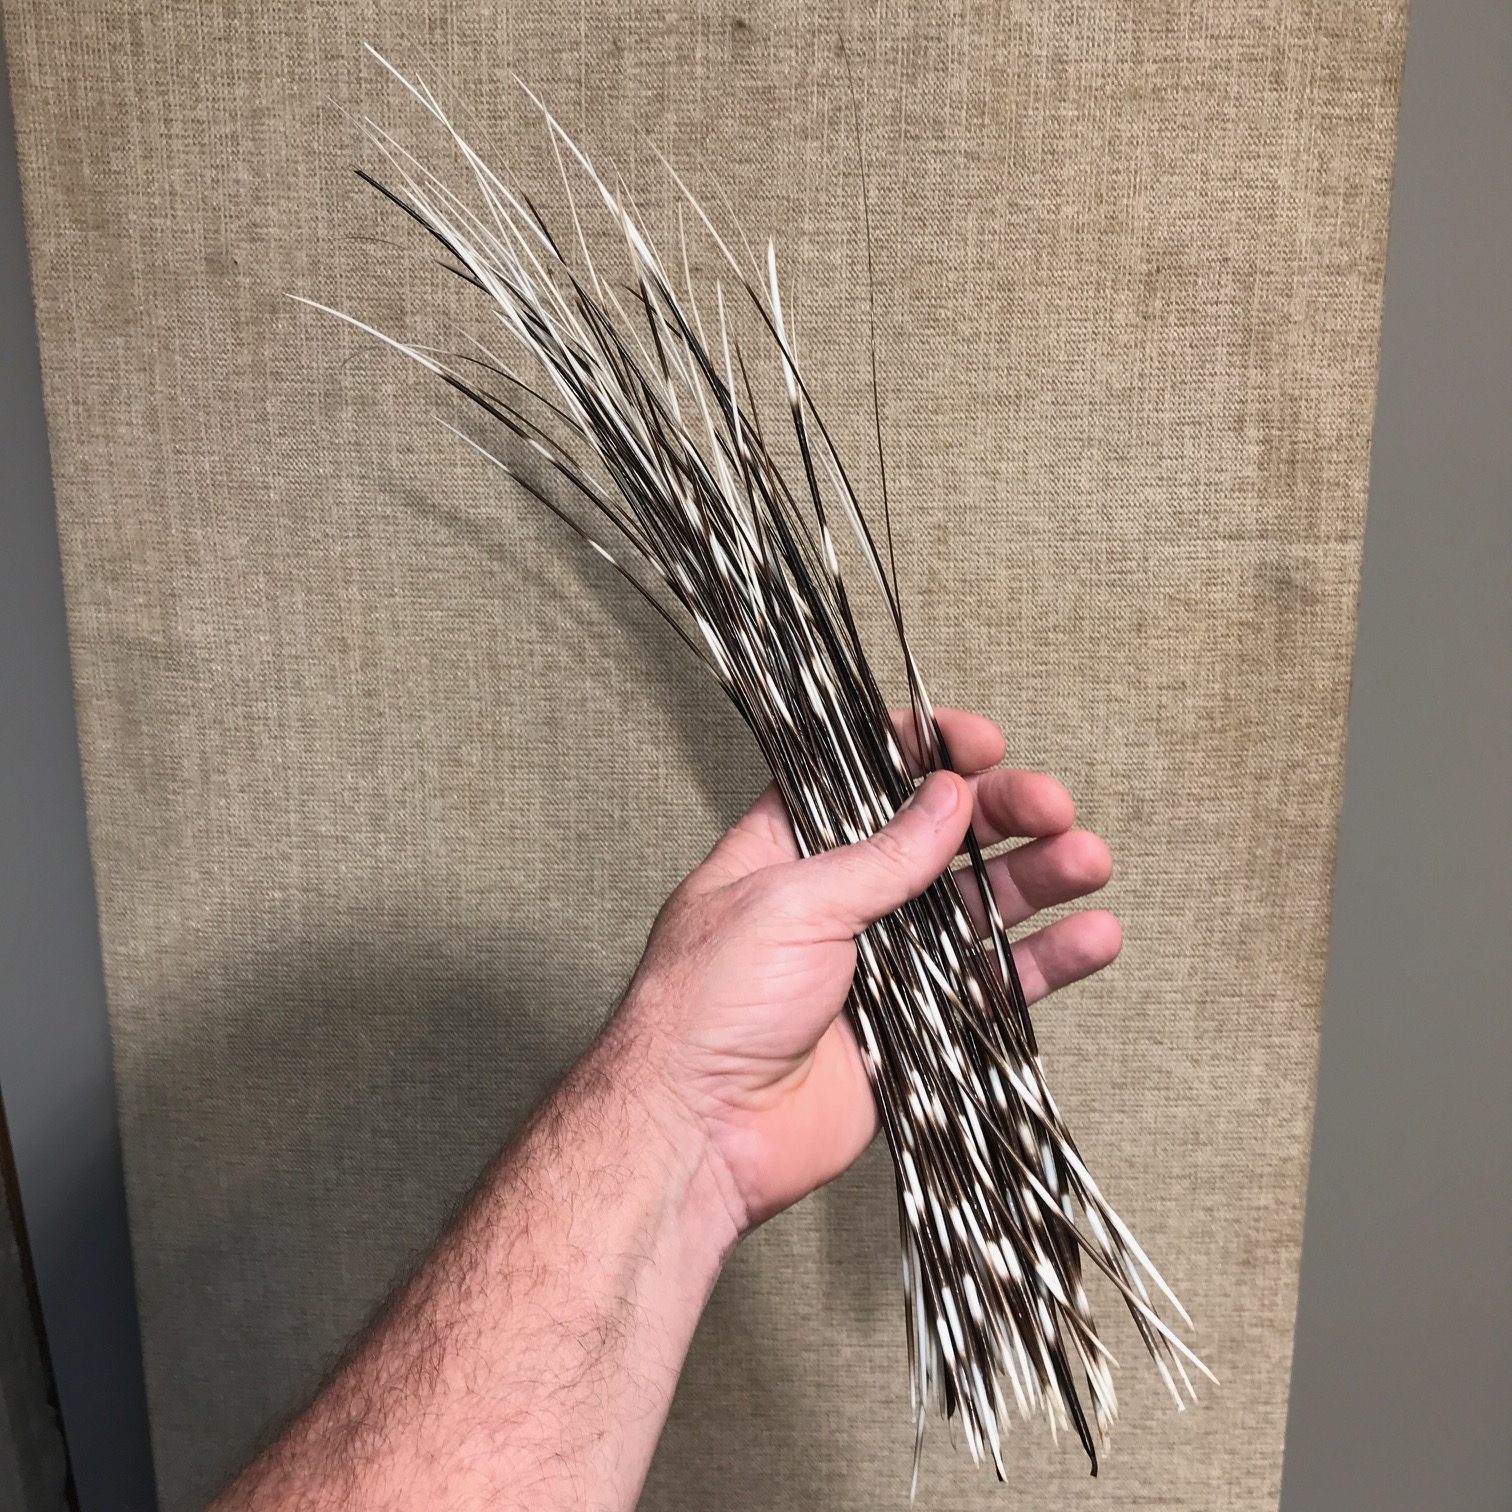 Intriguing, African porcupine quills are available for purchase at Natur.